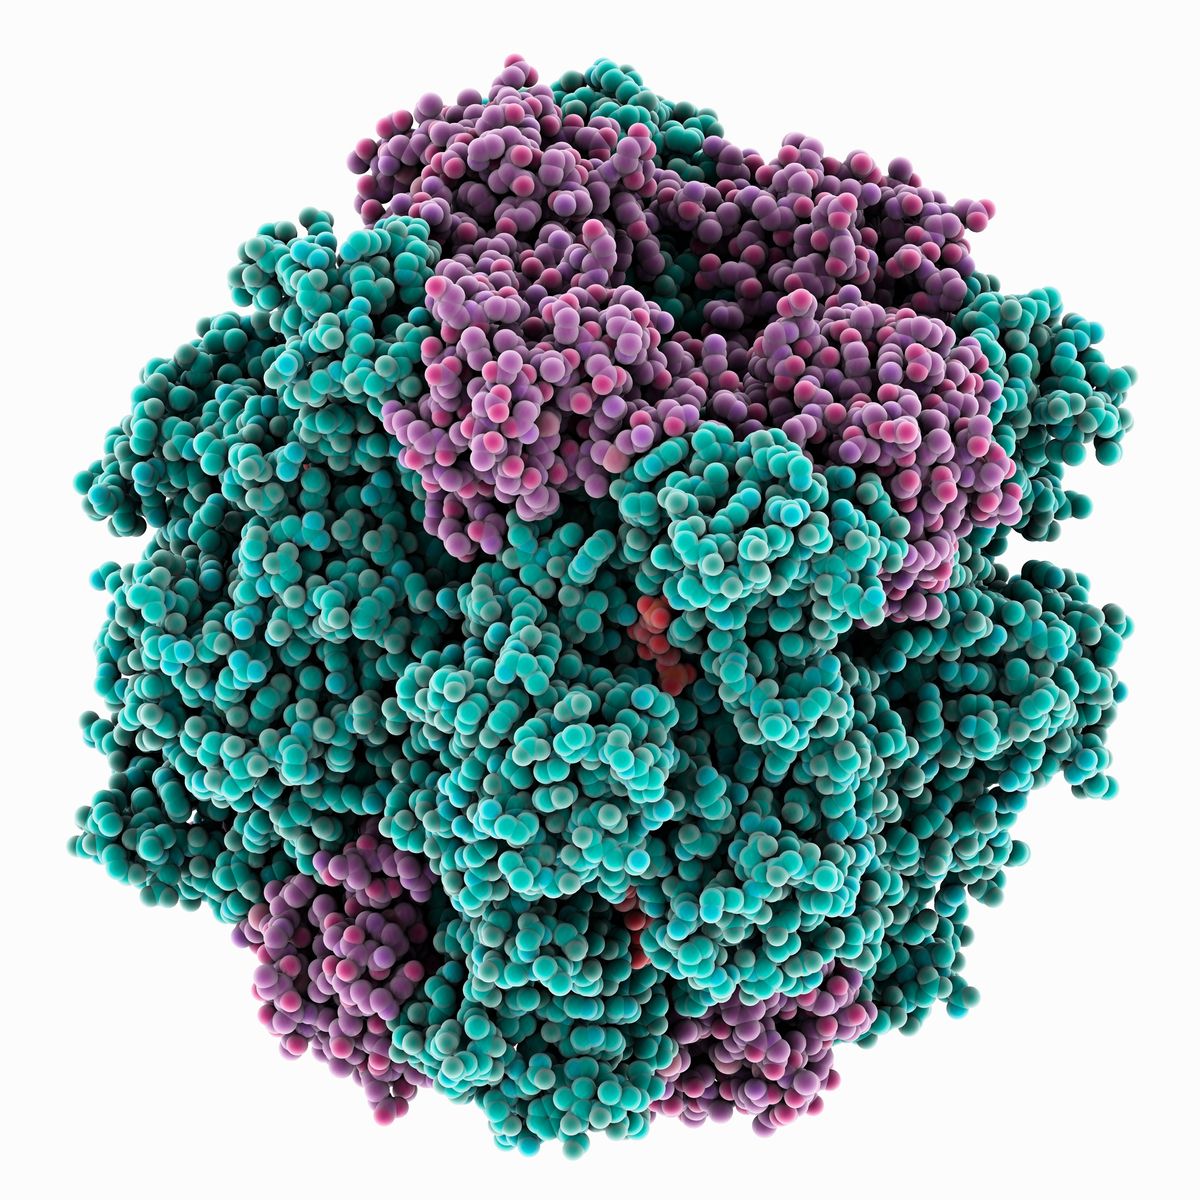 round protein with subunits shown in purple and teal